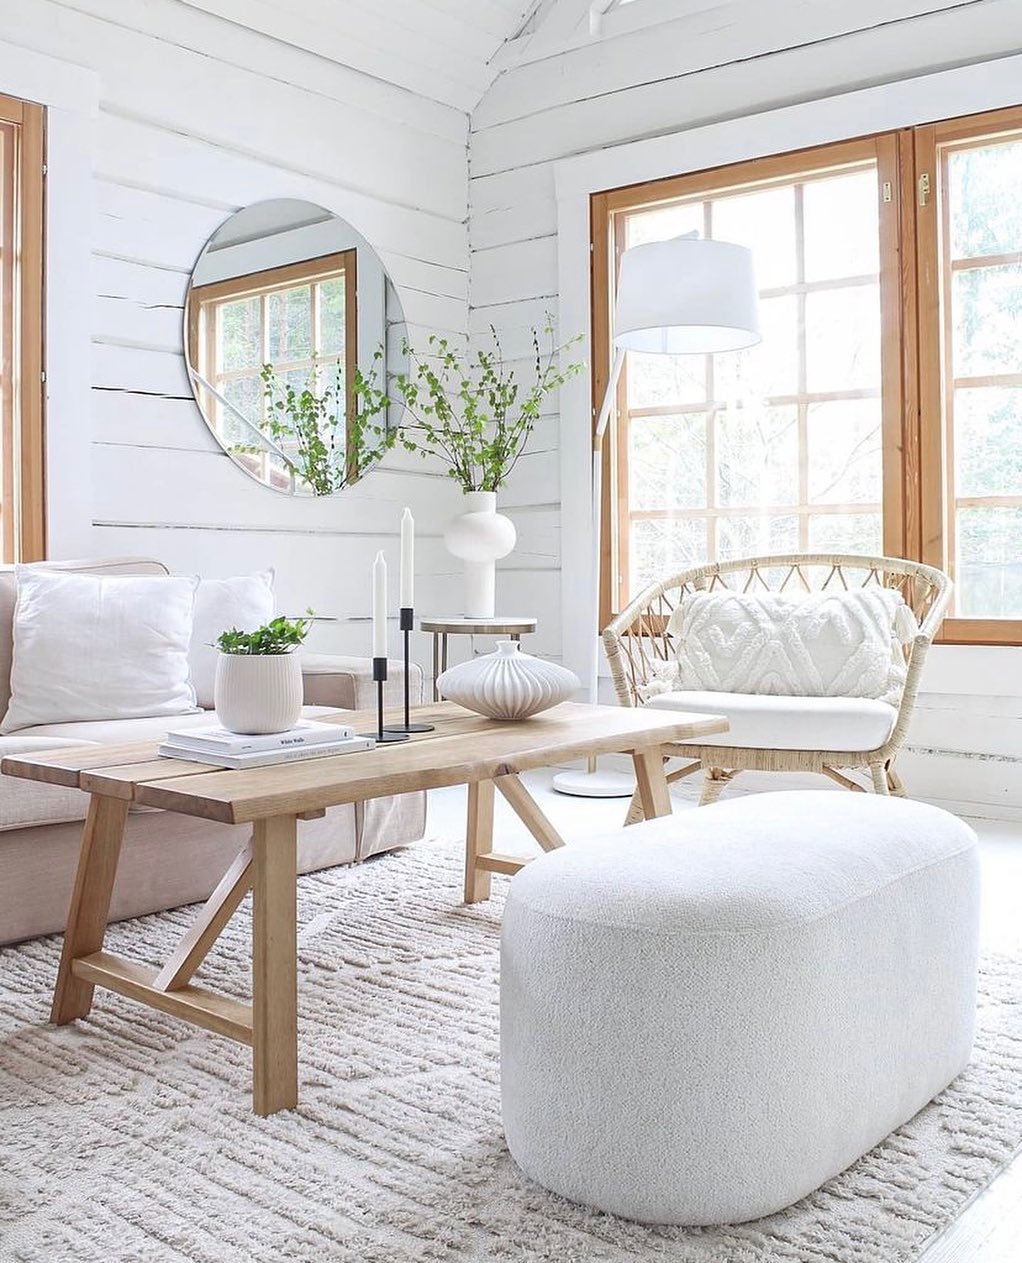 wicker chairs are popular both indoor as well as outdoor and make for a versatile option beyond the summer season.